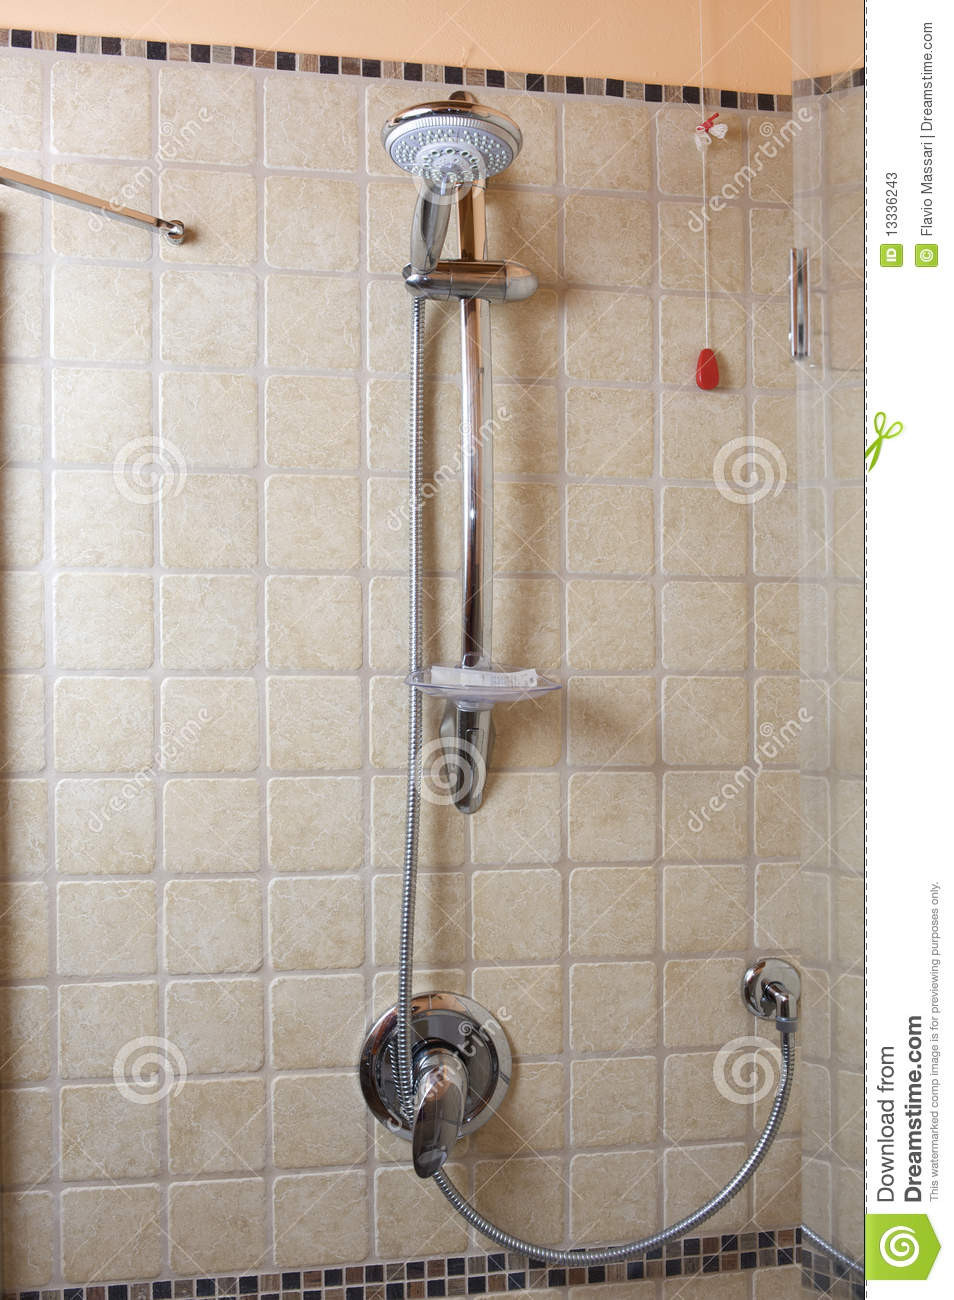 Bathroom Shower Heads And Faucets
 Shower head and faucet stock image Image of decoration